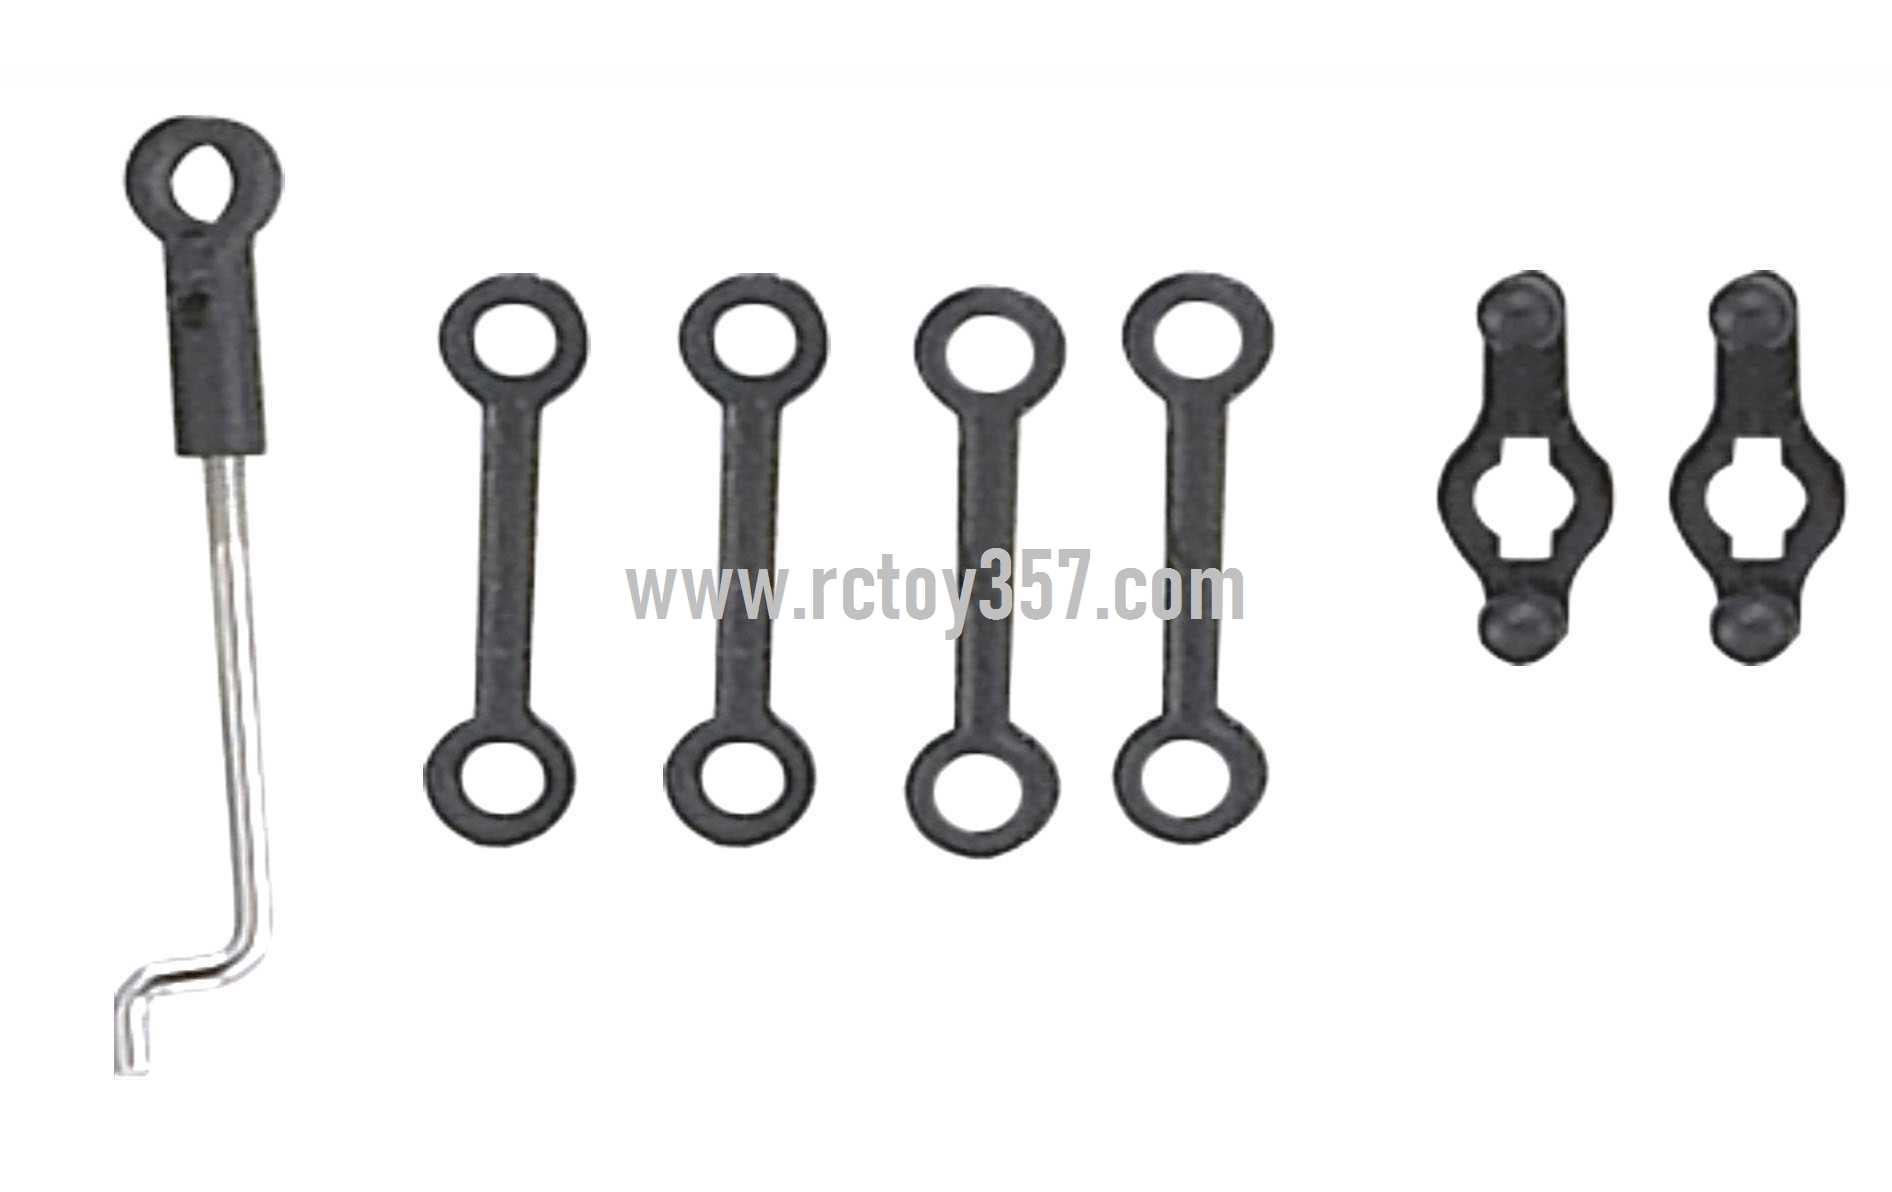 RCToy357.com - Shuang Ma/Double Hors 9103 toy Parts Connect buckle set